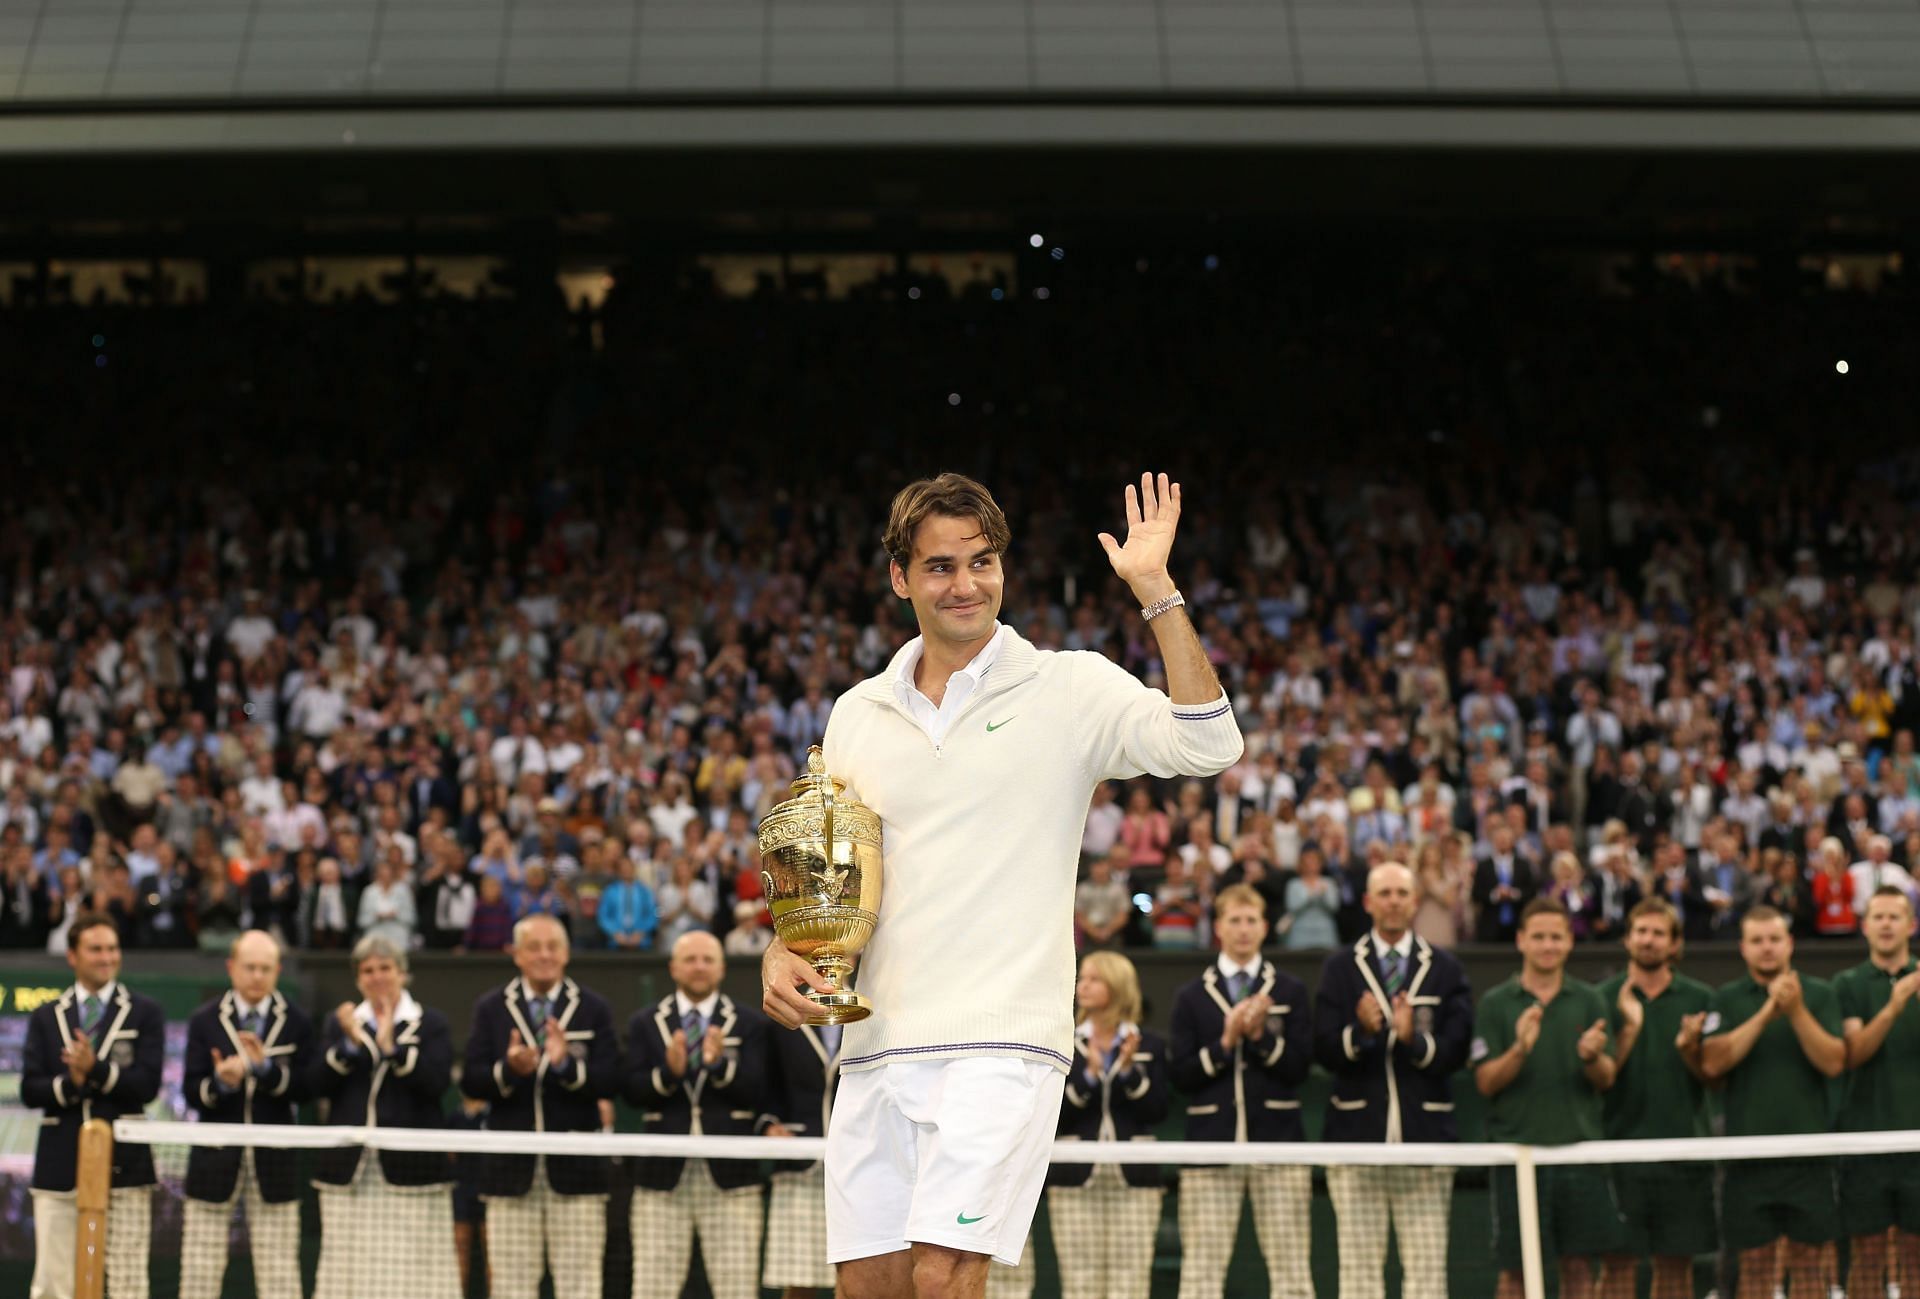 Roger Federer after winning his seventh Wimbledon title in 2012